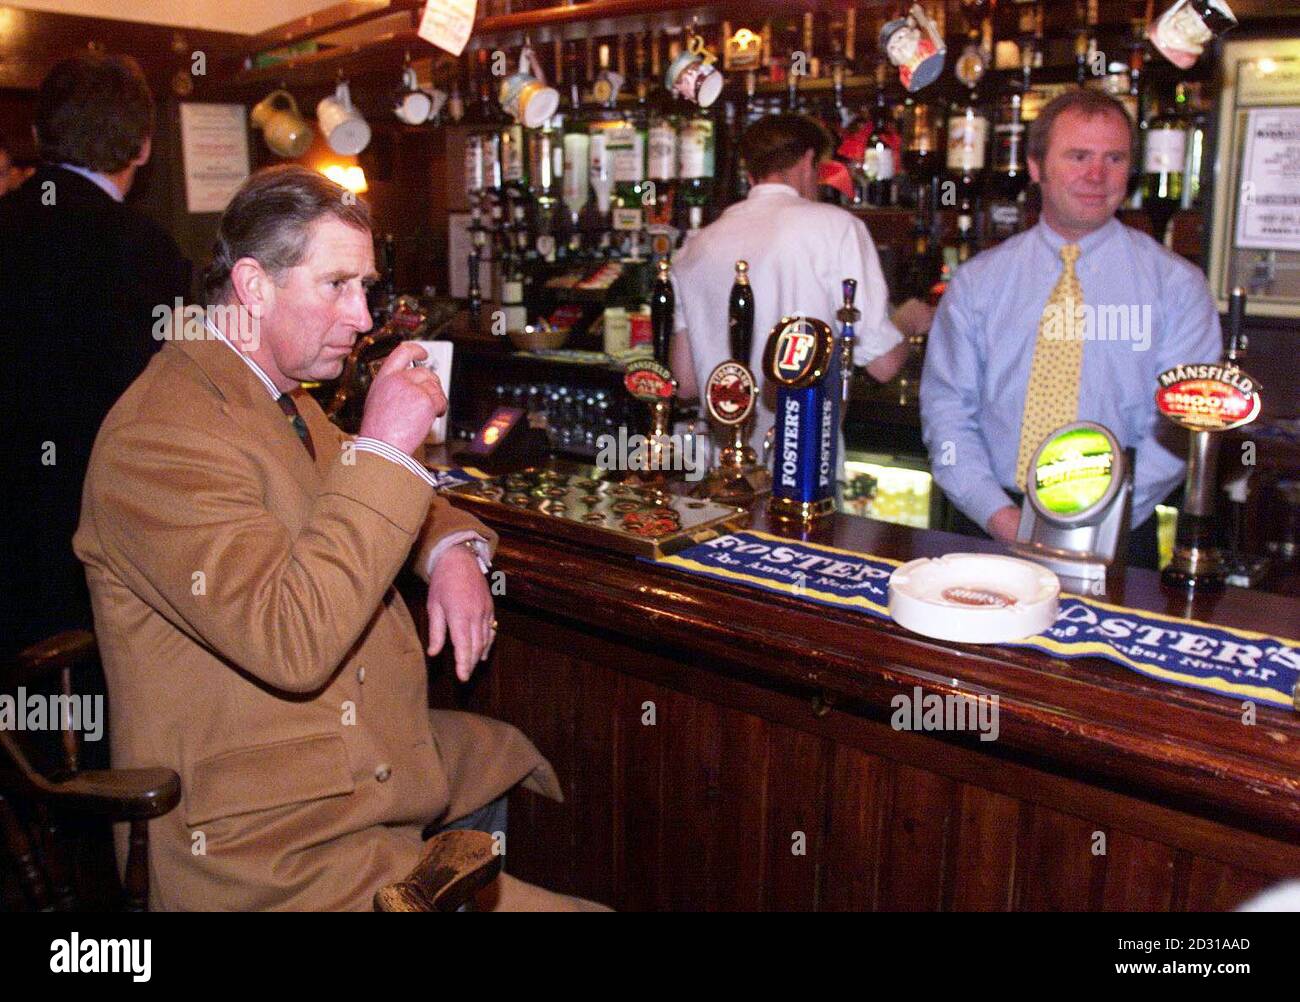 The Prince of Wales enjoys a whisky in the Blacksmith's pub in Naburn, Yorkshire, as he talks to residents about the recent flooding in the town. The Prince visited the city of Barlby where he met residents who had to evacuate their homes. * when the River Ouse burst its banks. Stock Photo